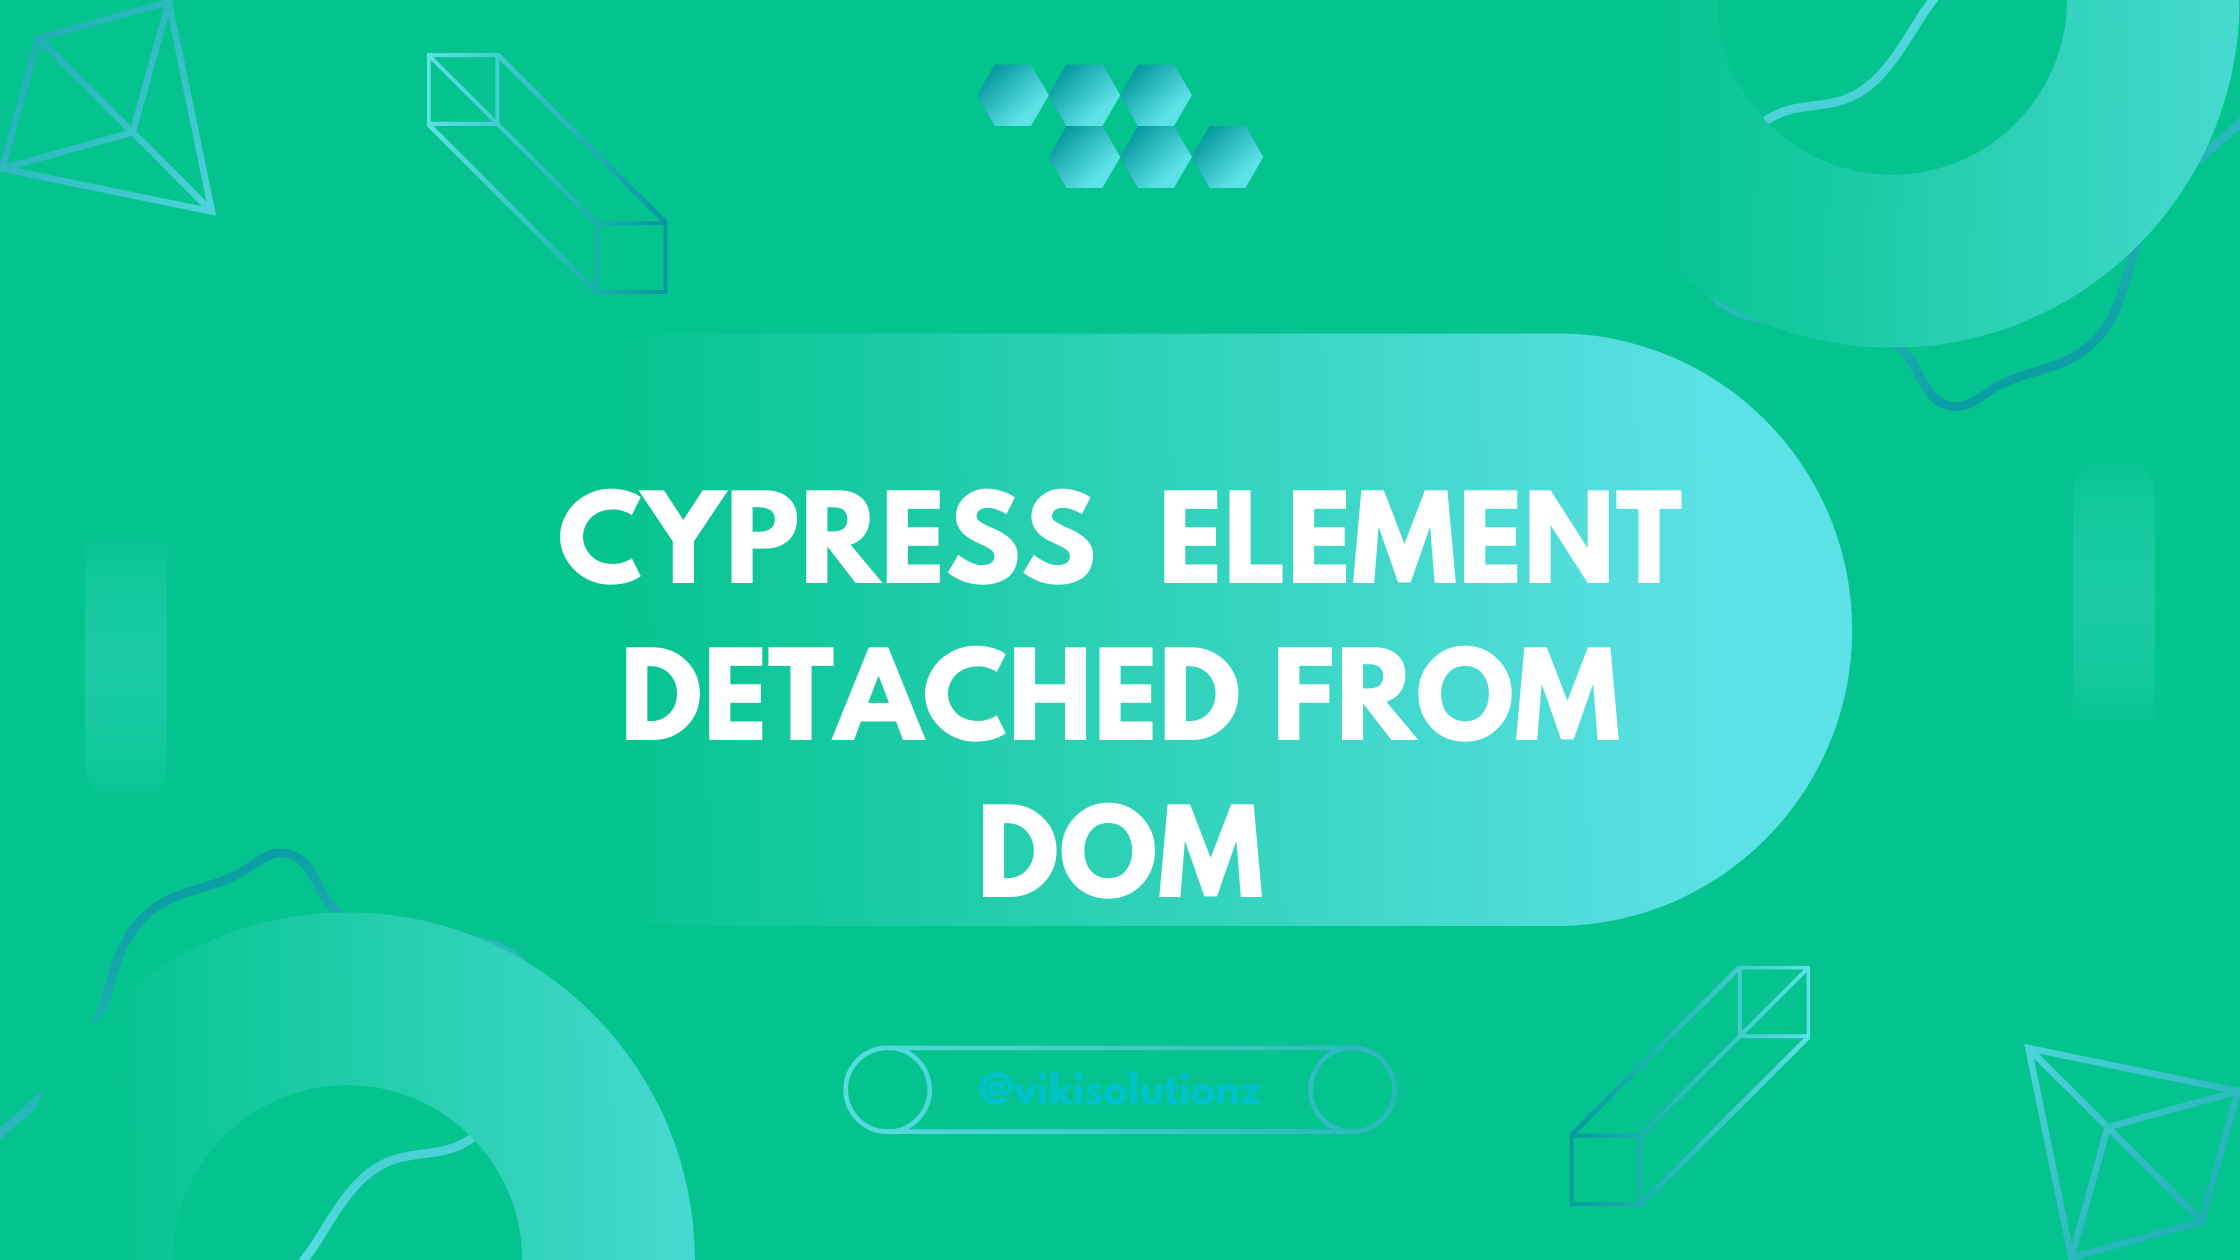 How To Avoid Element Detached From DOM Error in Cypress